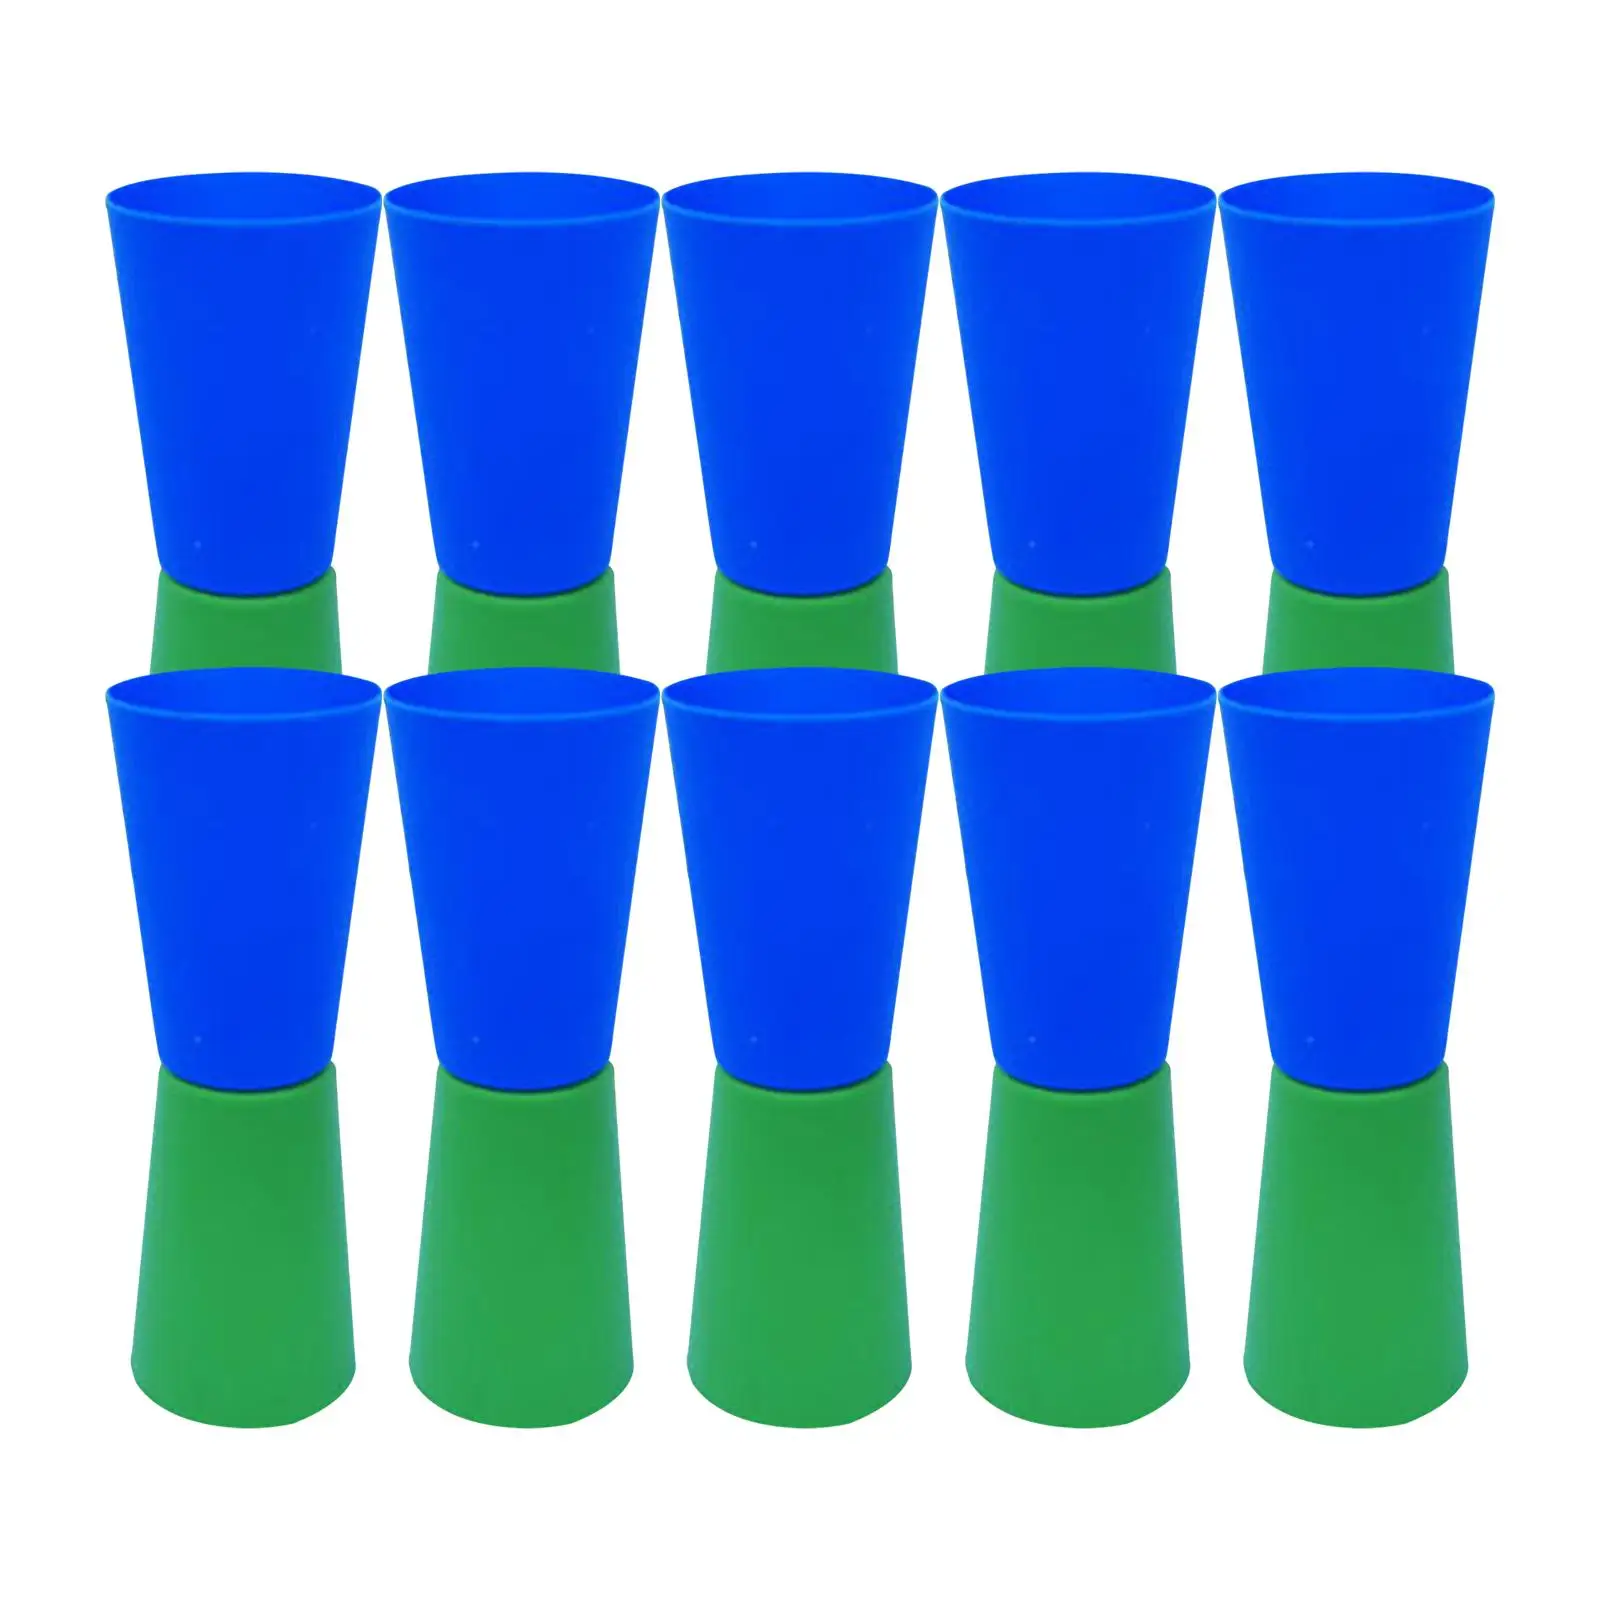 10x Flip Cups Agility Training Sport Equipment Body Coordination Physical Fitness Aid for Events Gym Basketball Outdoor with Net